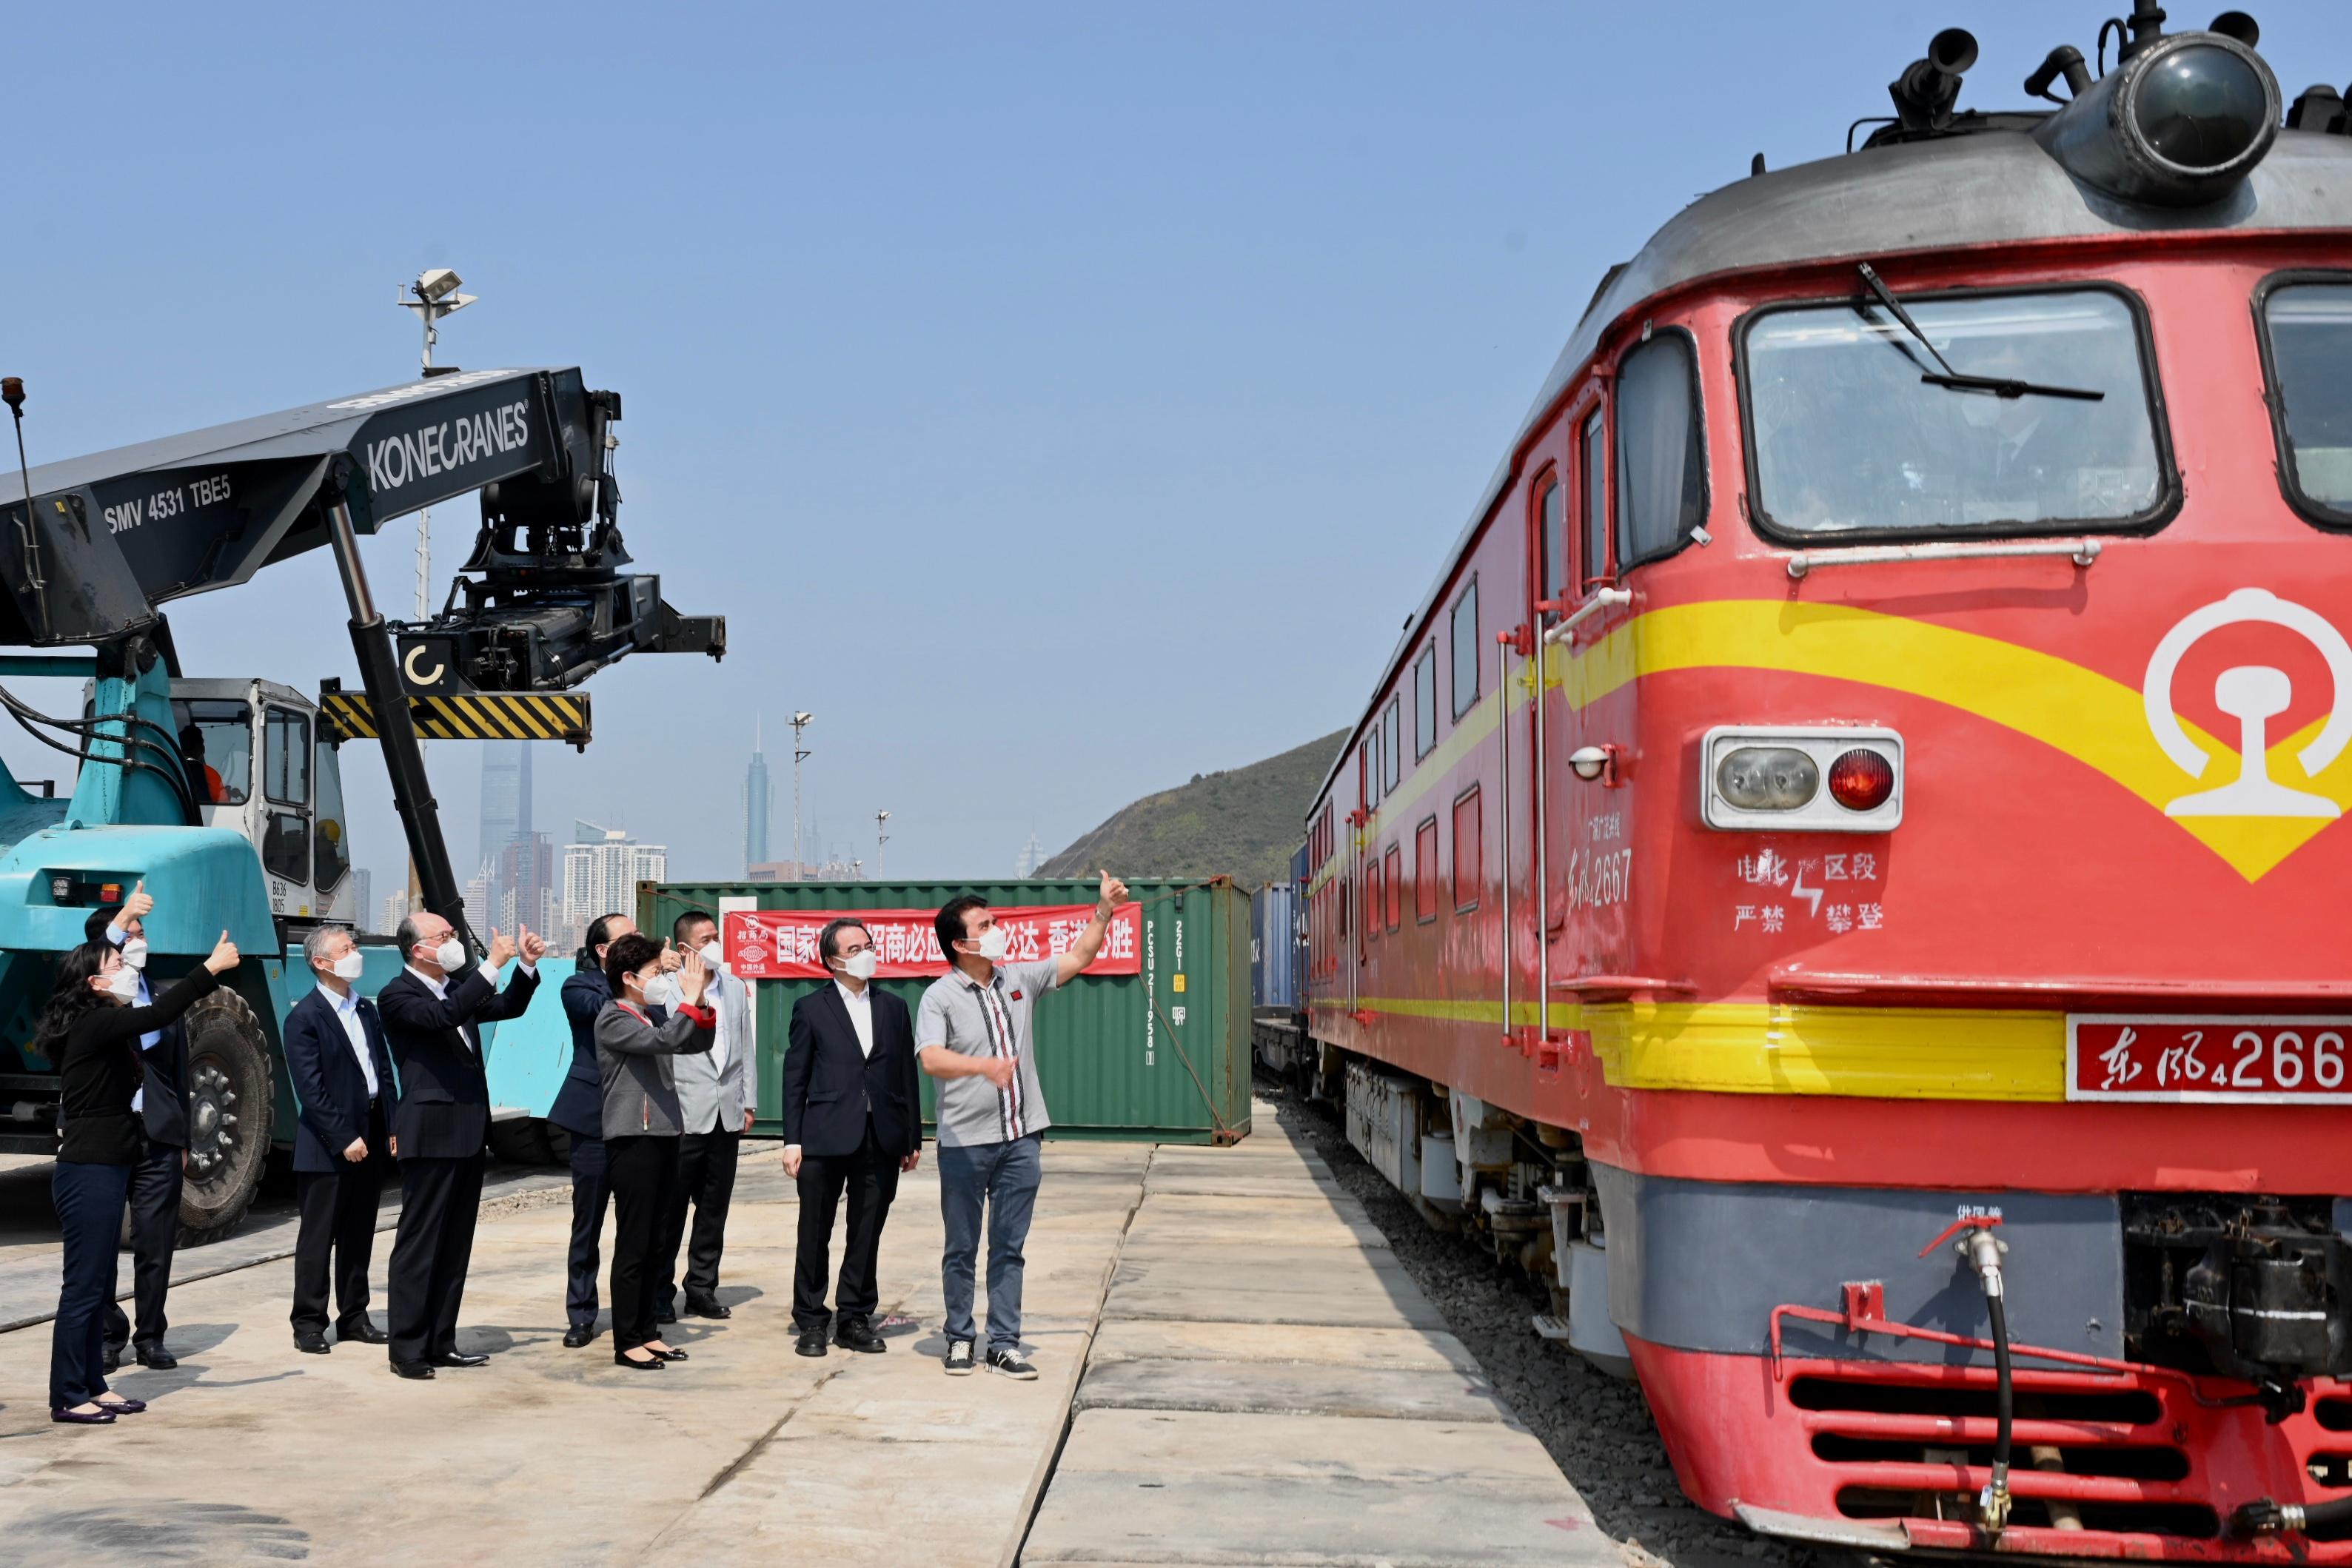 The railway transportation of goods from the Mainland to Hong Kong commenced today (March 2) with the first train carrying anti-epidemic supplies arriving at Hong Kong this morning. Photo shows the Chief Executive, Mrs Carrie Lam (first row, centre); the Secretary for Transport and Housing, Mr Frank Chan Fan (first row, second left); the Permanent Secretary for Transport and Housing (Transport), Ms Mable Chan (first row, first left); the Chief Executive Officer of MTR Corporation Limited, Dr Jacob Kam (first row, second right), the Assistant President of the China Merchants Group Limited, Mr Chu Zongsheng (second row, second left); and other personnel, expressing their gratitude to the staff members of the first cross-boundary cargo train. 